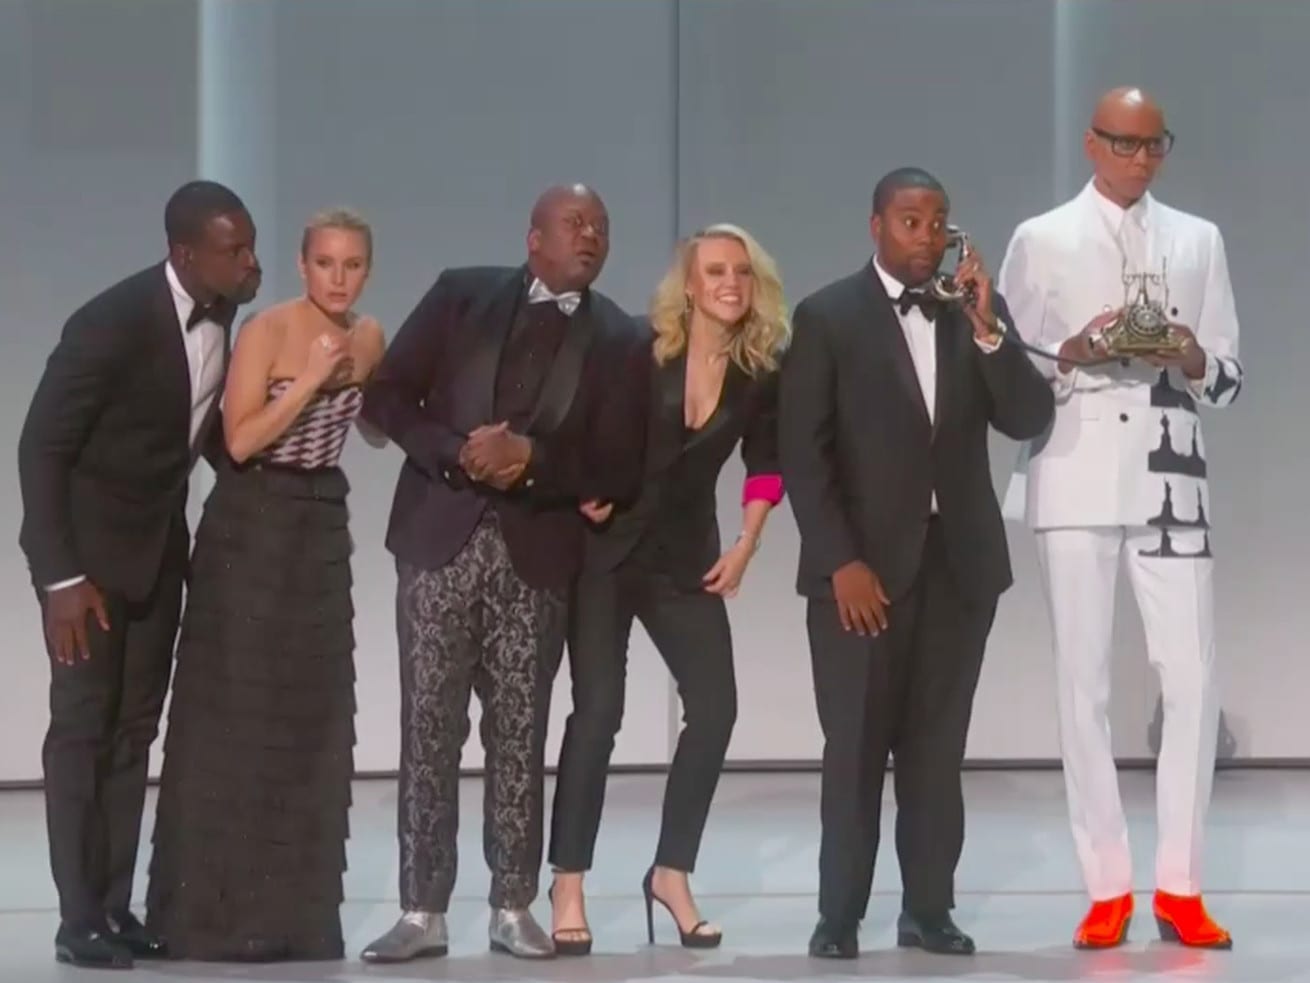 The Emmys’ opening musical number was a wry nod to Hollywood’s (lack of) diversity